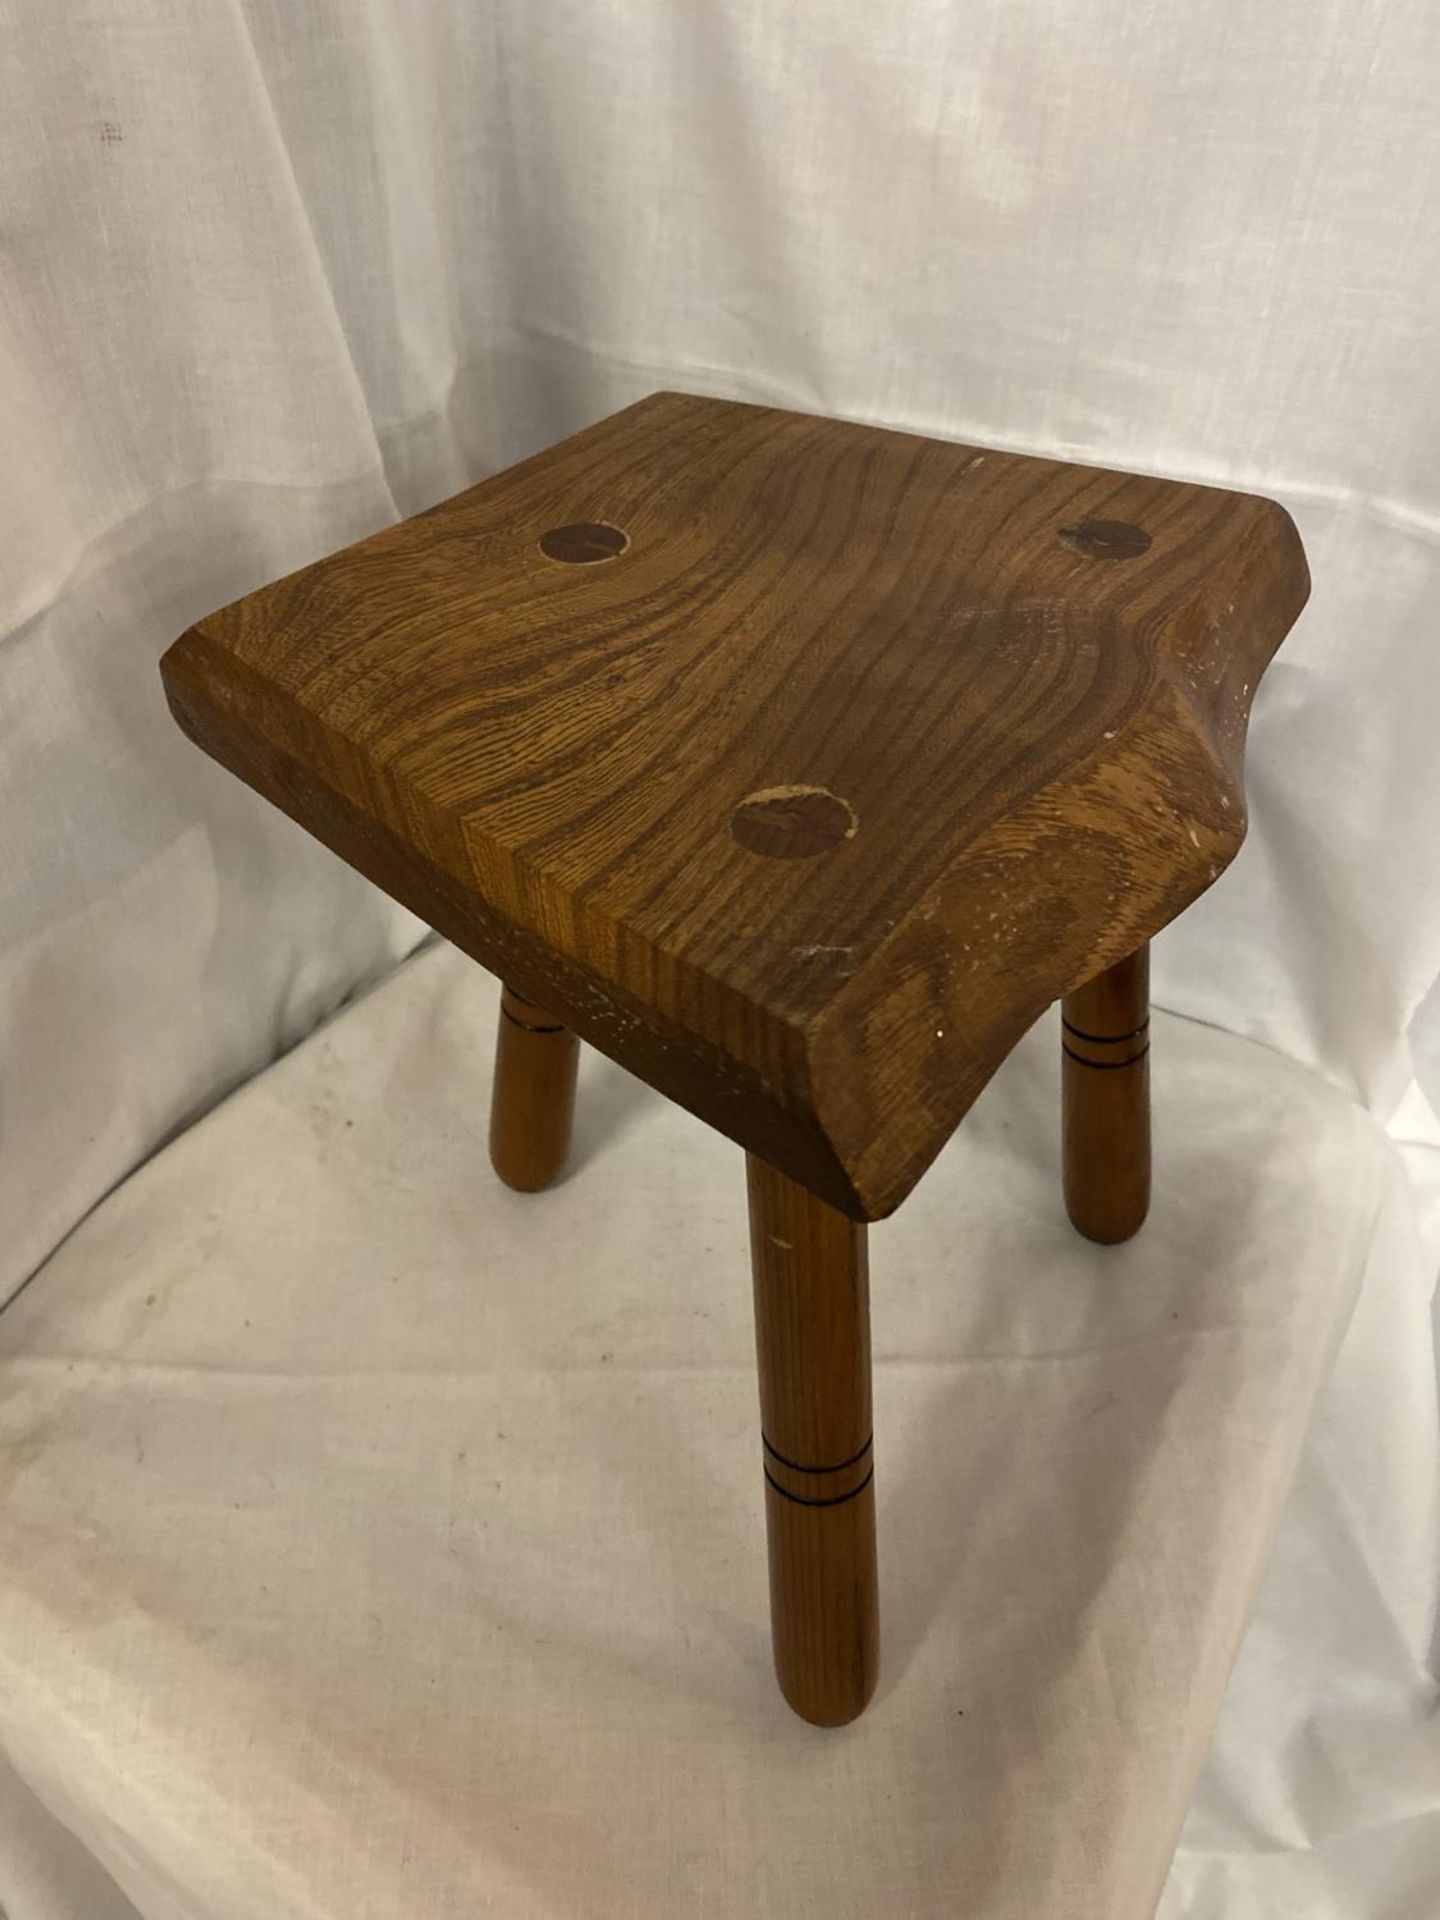 A THREE LEGGED MILKING STOLL WITH OAK TOP AND PINE LEGS - Image 2 of 3